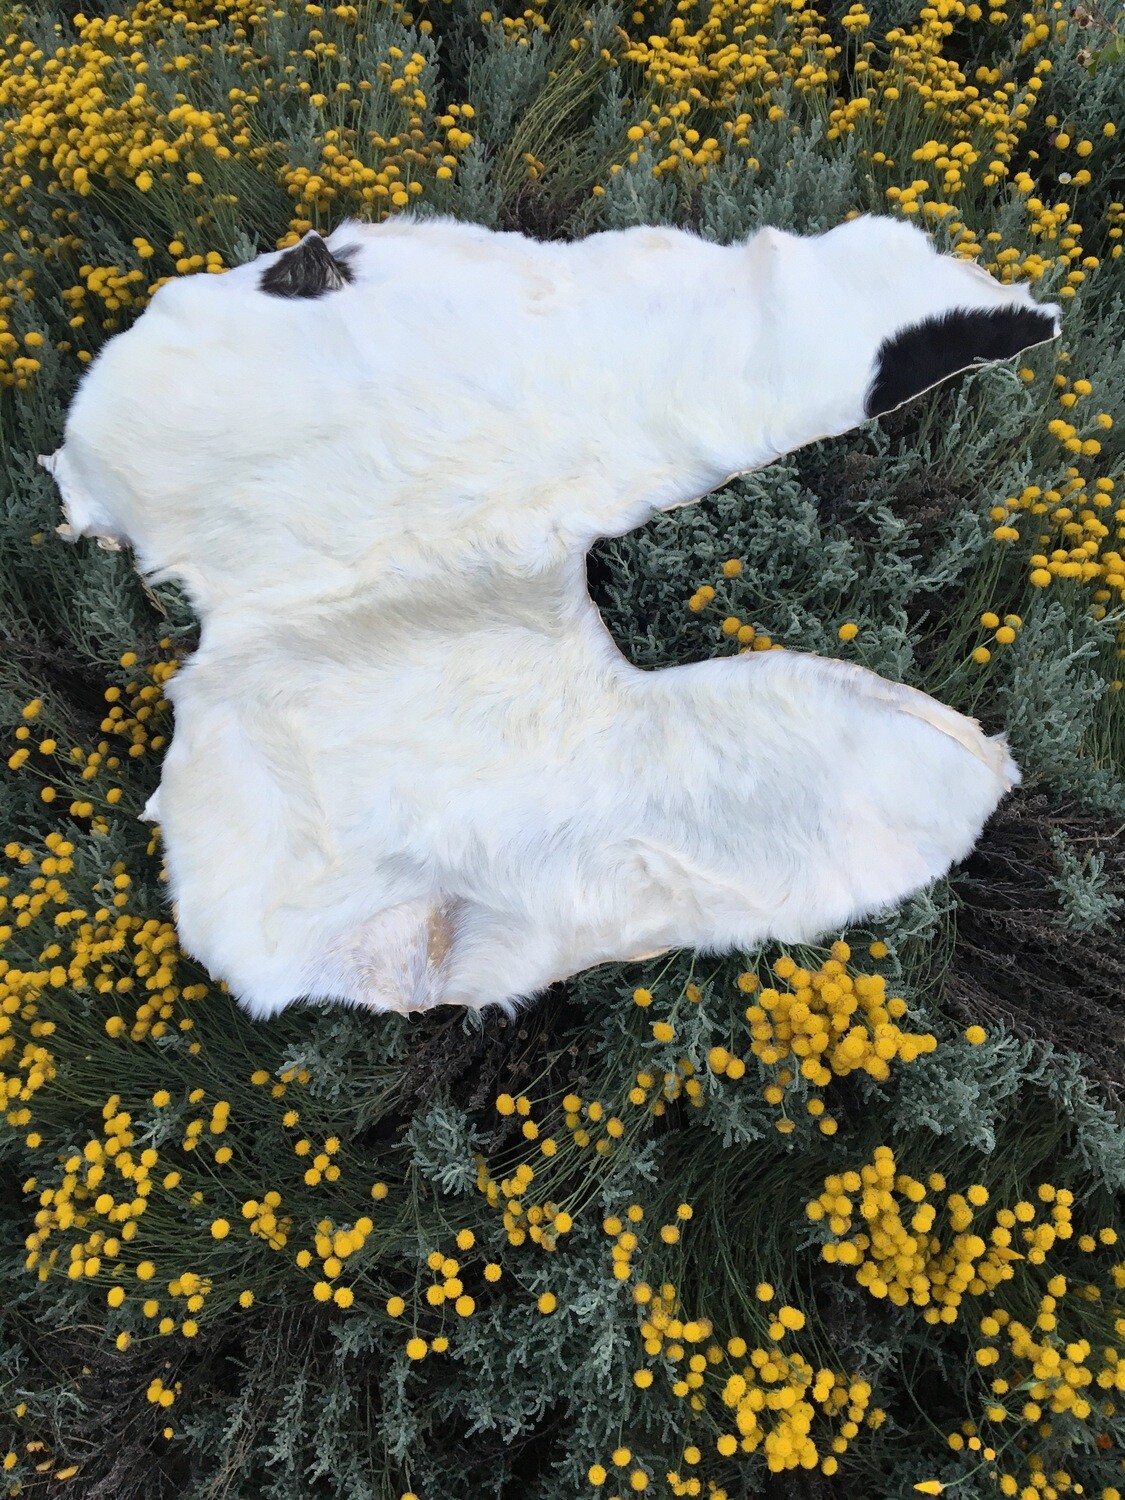 Goat Hide: saddle shaped, white with black spots